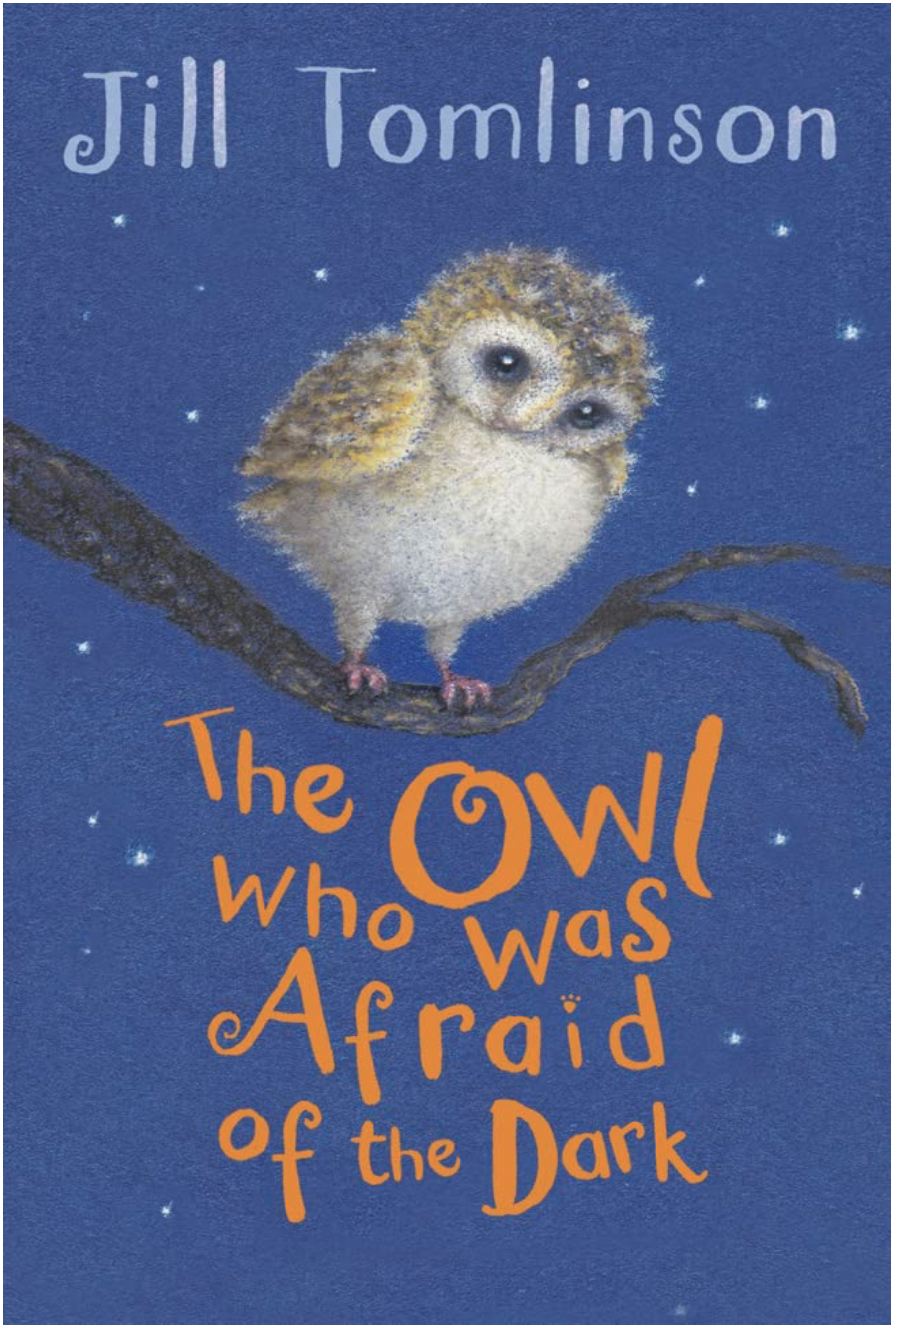 The Owl who was afraid of the dark